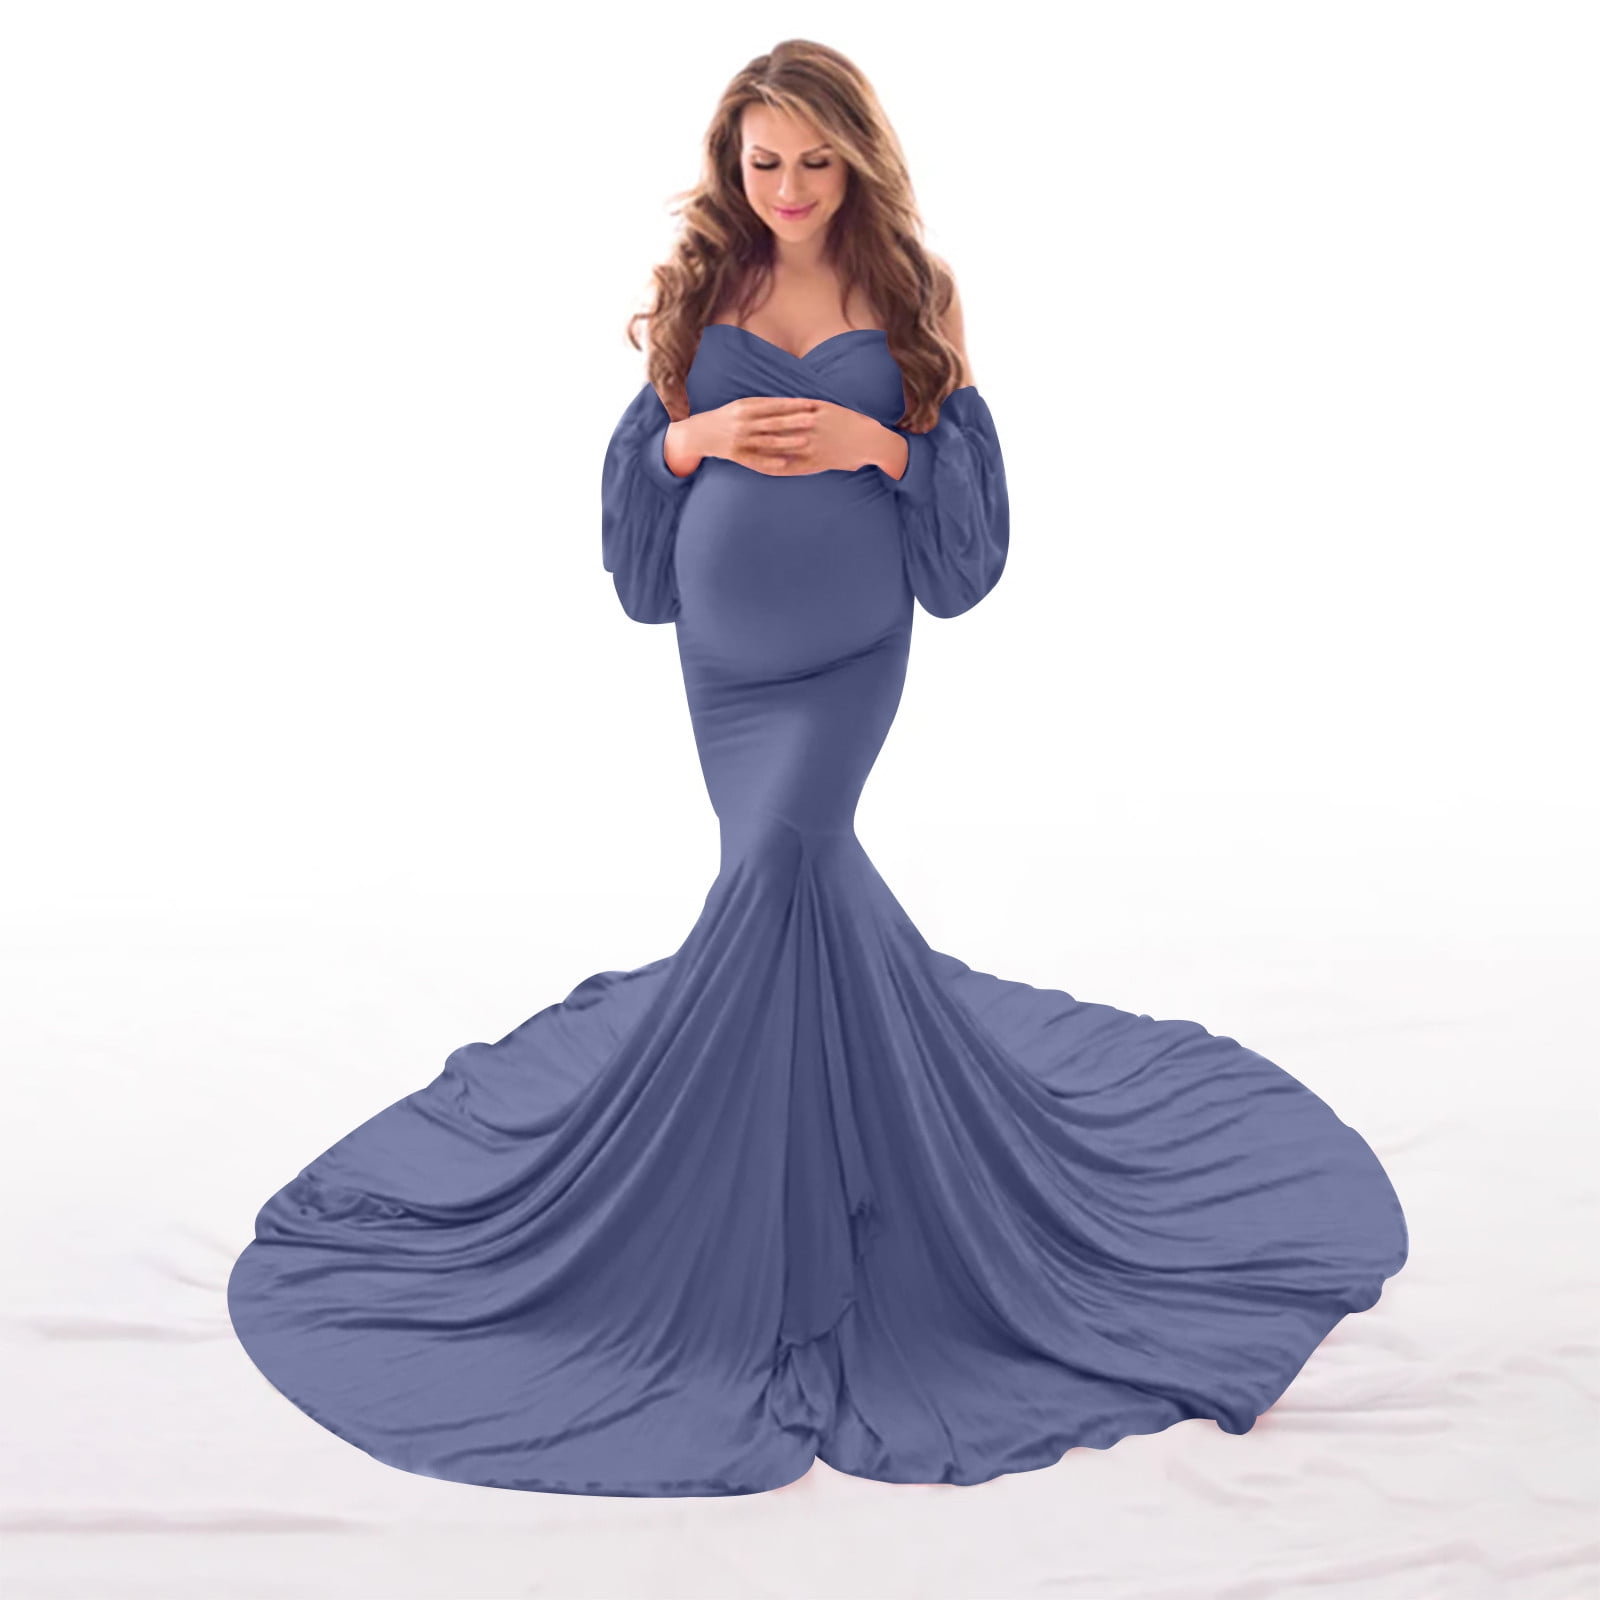 Taqqpue Womens Off Shoulder Maternity Dress Photoshot Baby Shower Puff Sleeve Slim Fit Gown Flowy Ruffle Stretchy Long Maxi Photography Pregnancy Dre 6846bcfd 1ca8 4c3b a89d 14fd6e264ea4.f6c7cae0732504291f3a72c04620b994